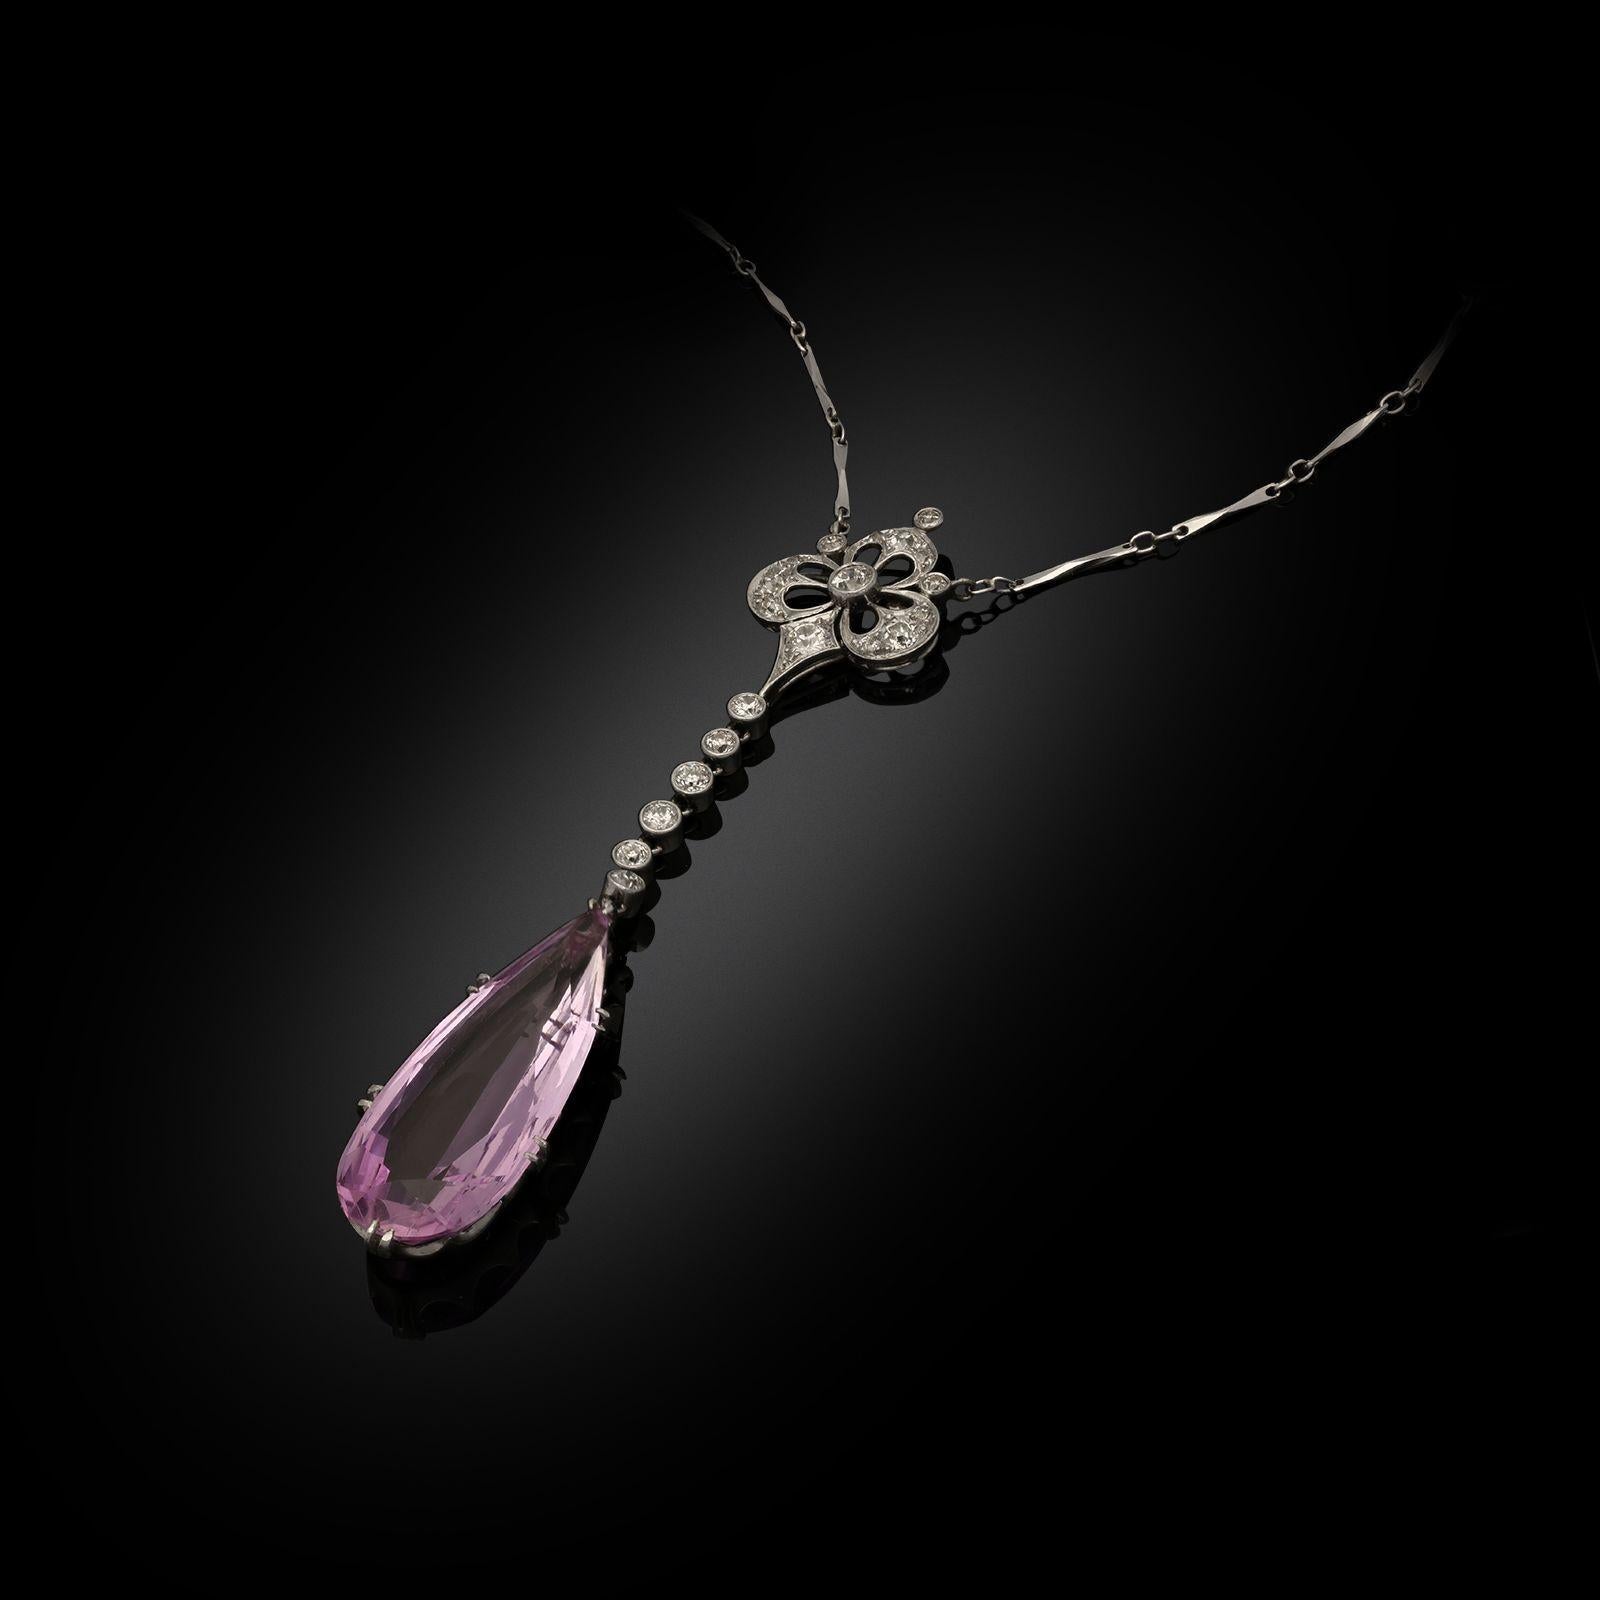 An elegant Edwardian topaz and diamond pendant c.1910, set with a beautiful elongated pear shaped pink topaz drop in minimal platinum claw setting suspended beneath a run of six old European cut diamonds in rub over settings beneath an openwork